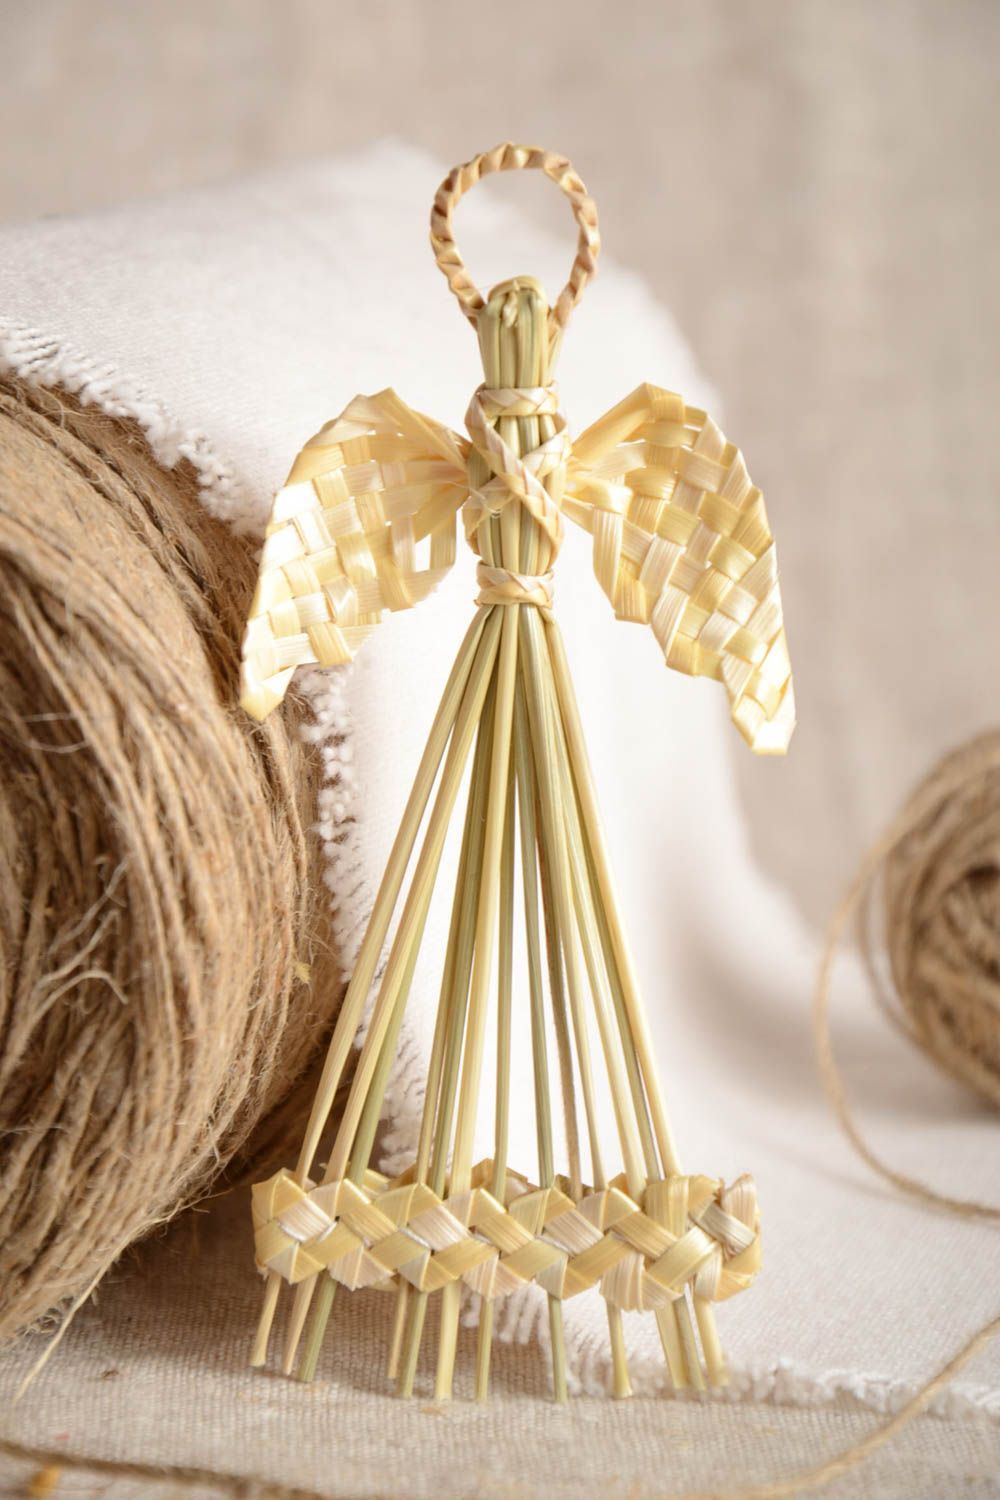 Interior hanging made of straw decoration in shape of angel eco home decor photo 1